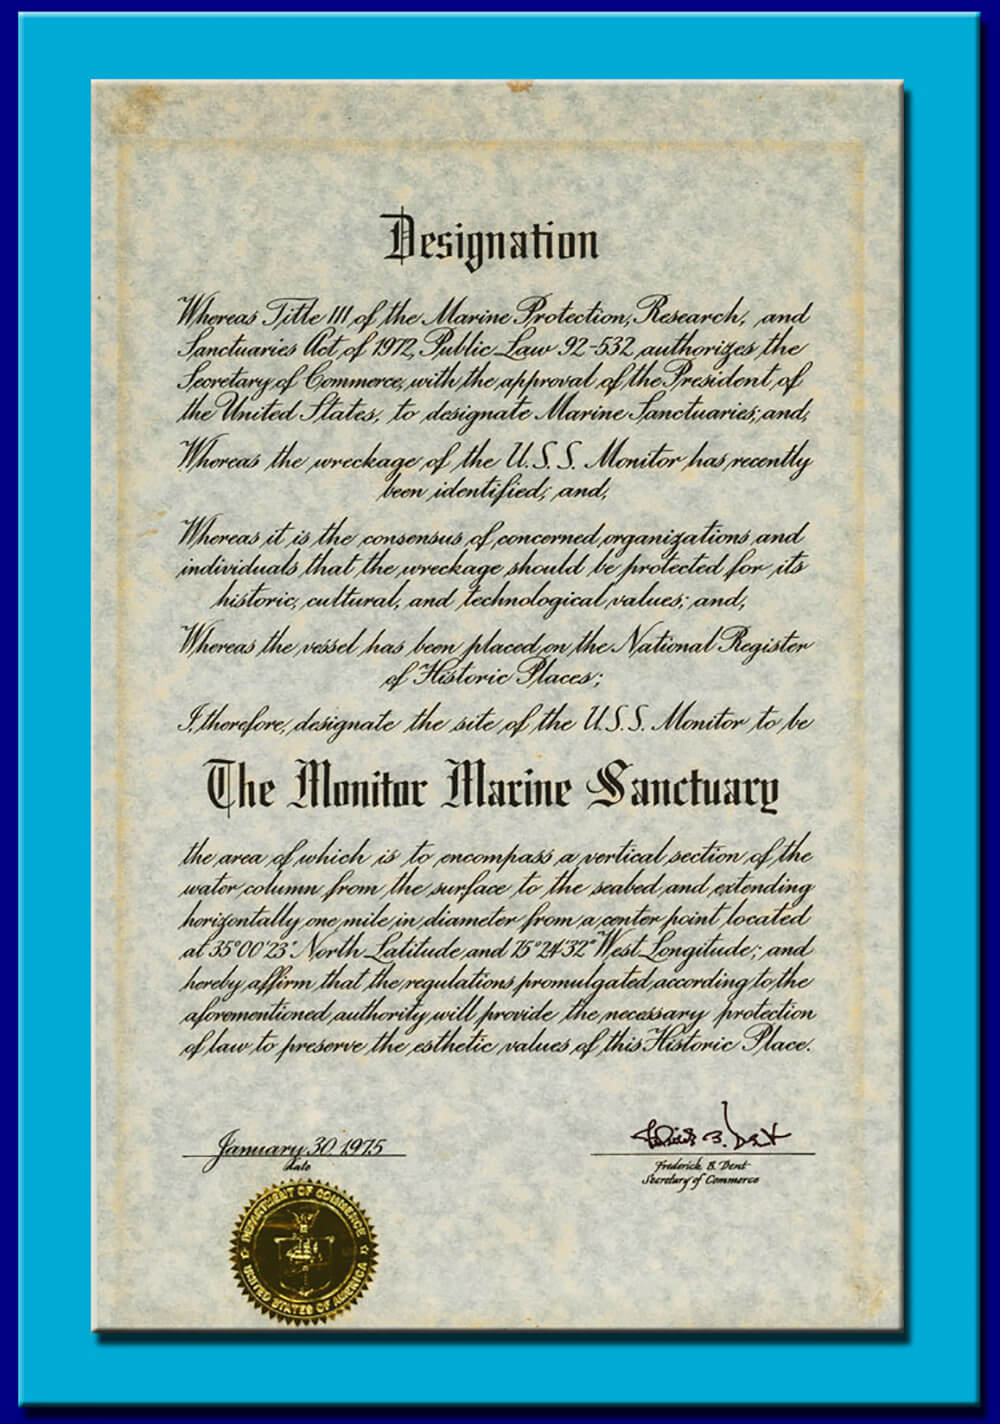 the document designating the monitor as a national marine sanctuary